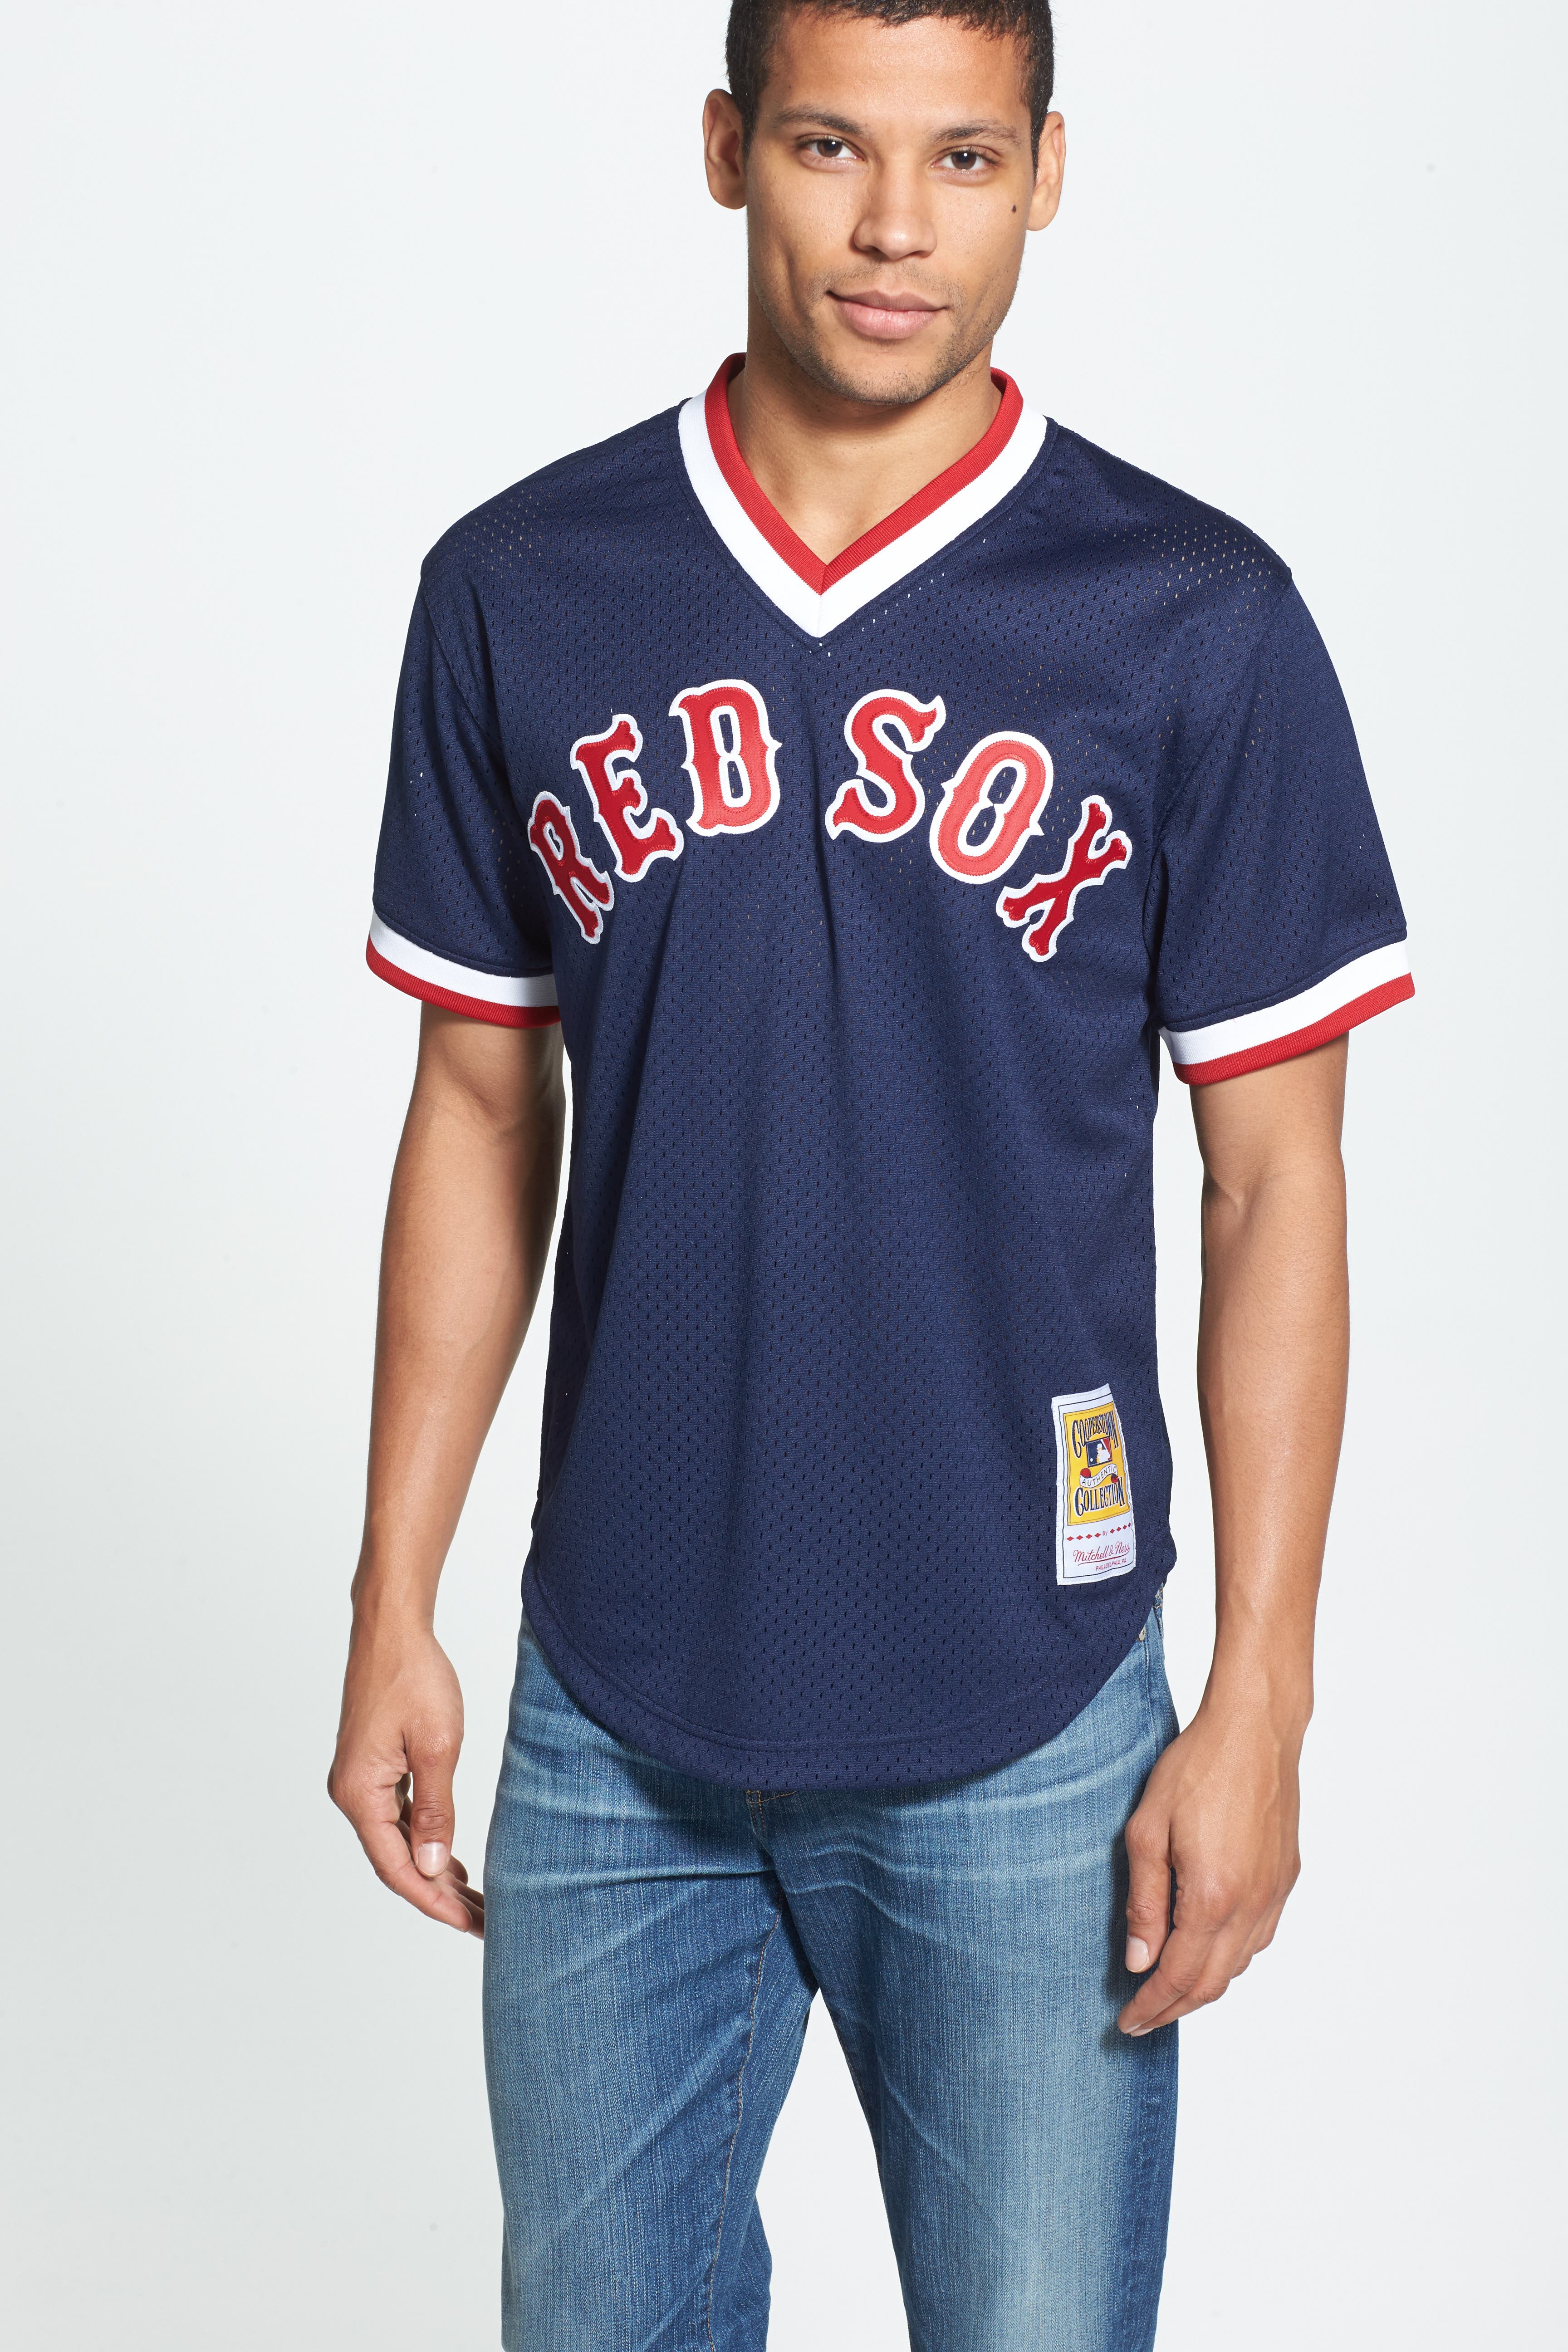 mitchell and ness red sox